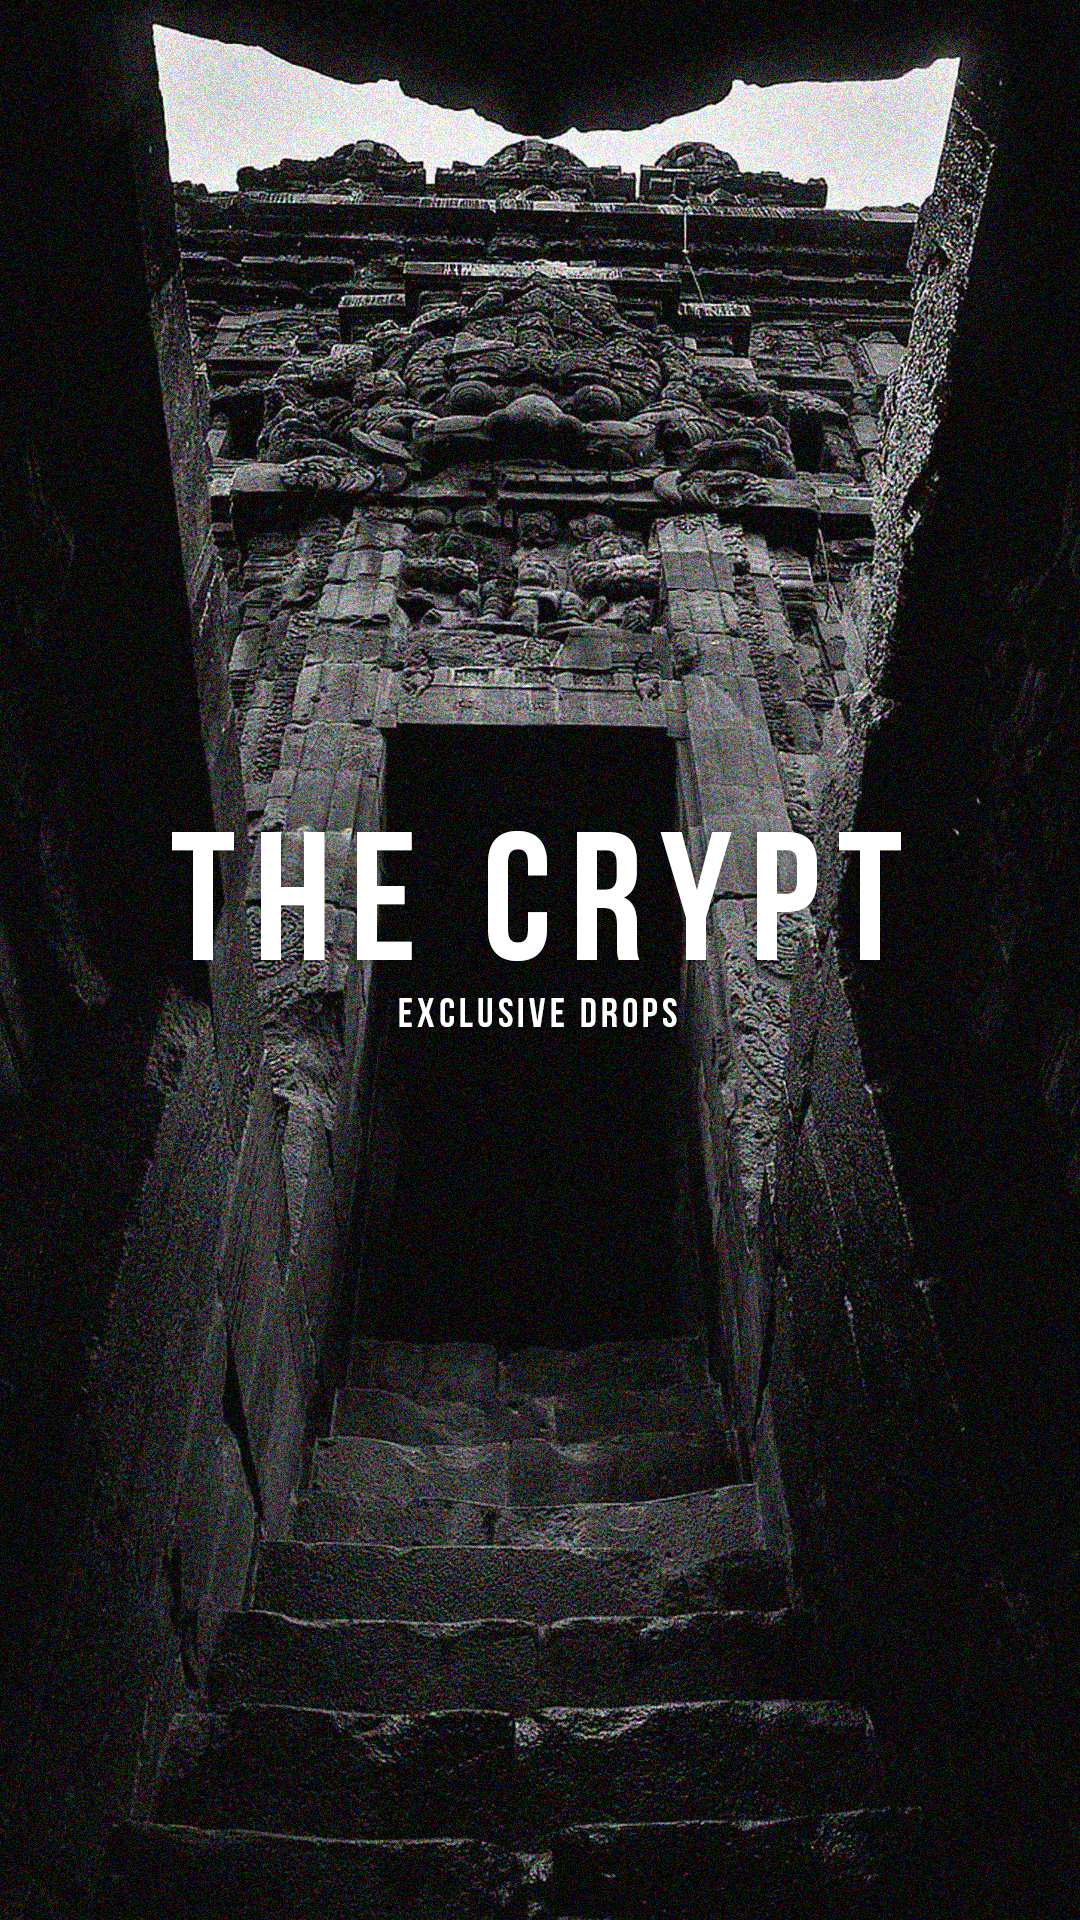 THE CRYPT: EXCLUSIVE DROPS